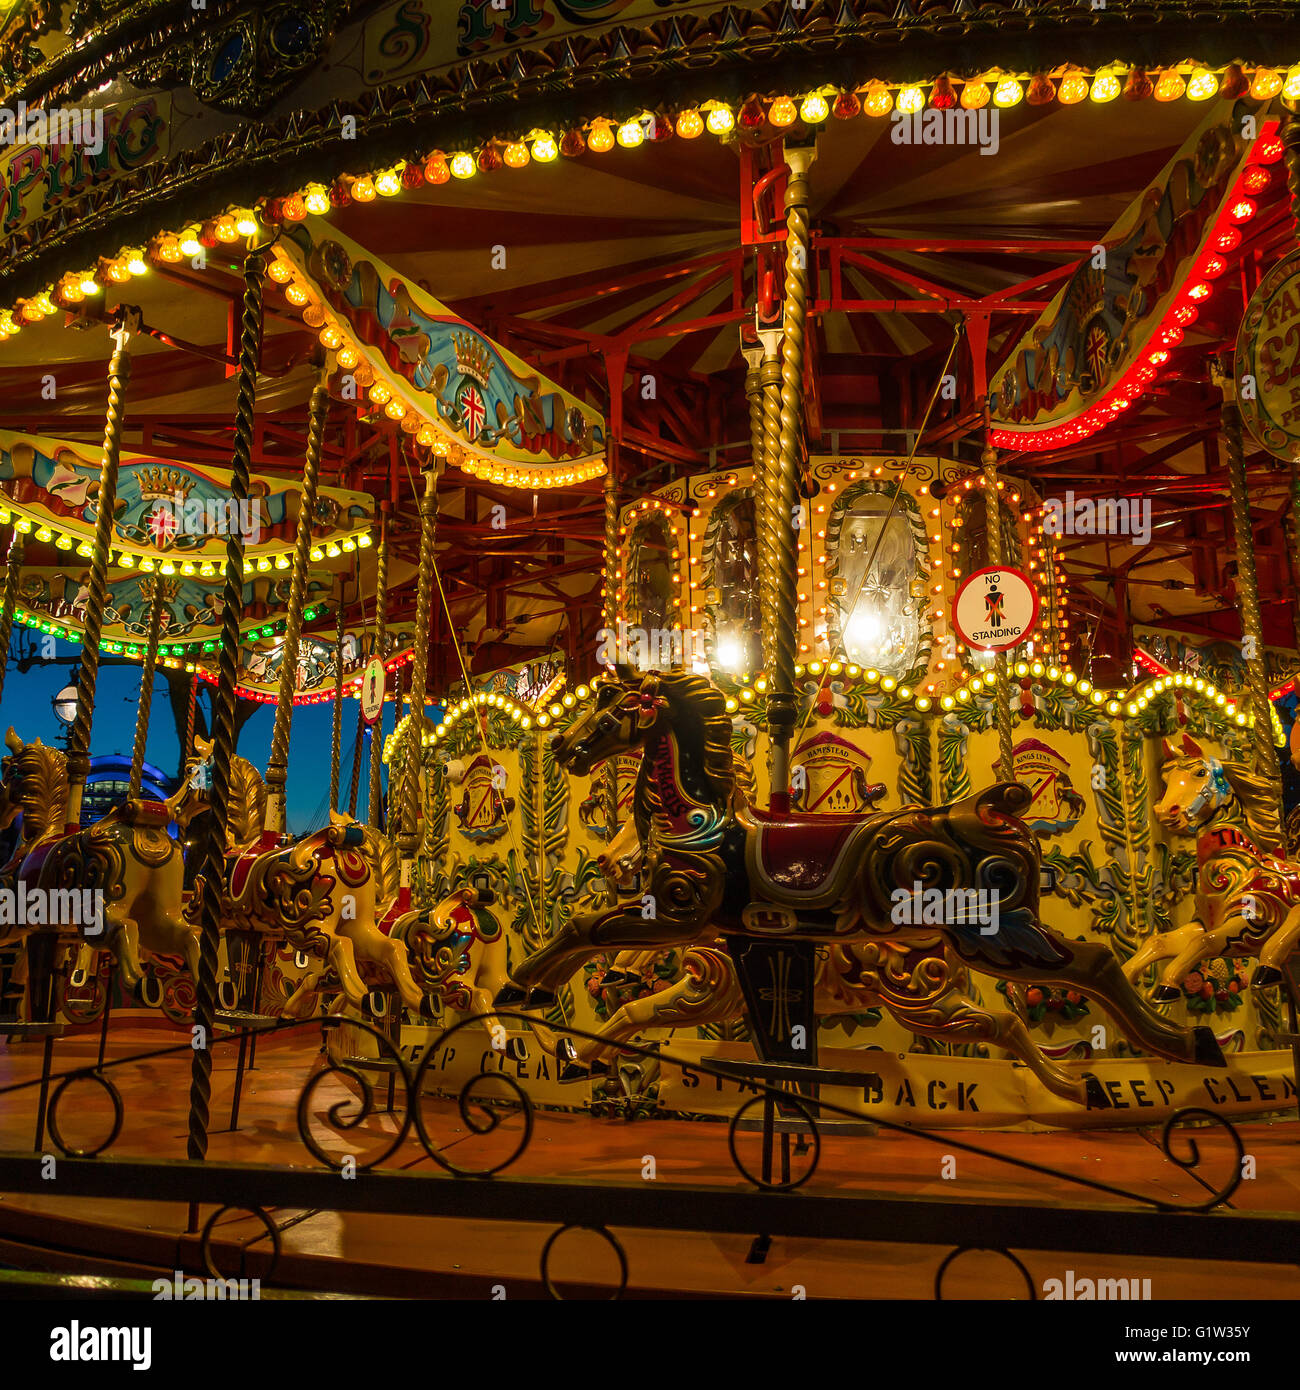 Fairground Carousel London South Bank Angleterre Nuit Banque D'Images